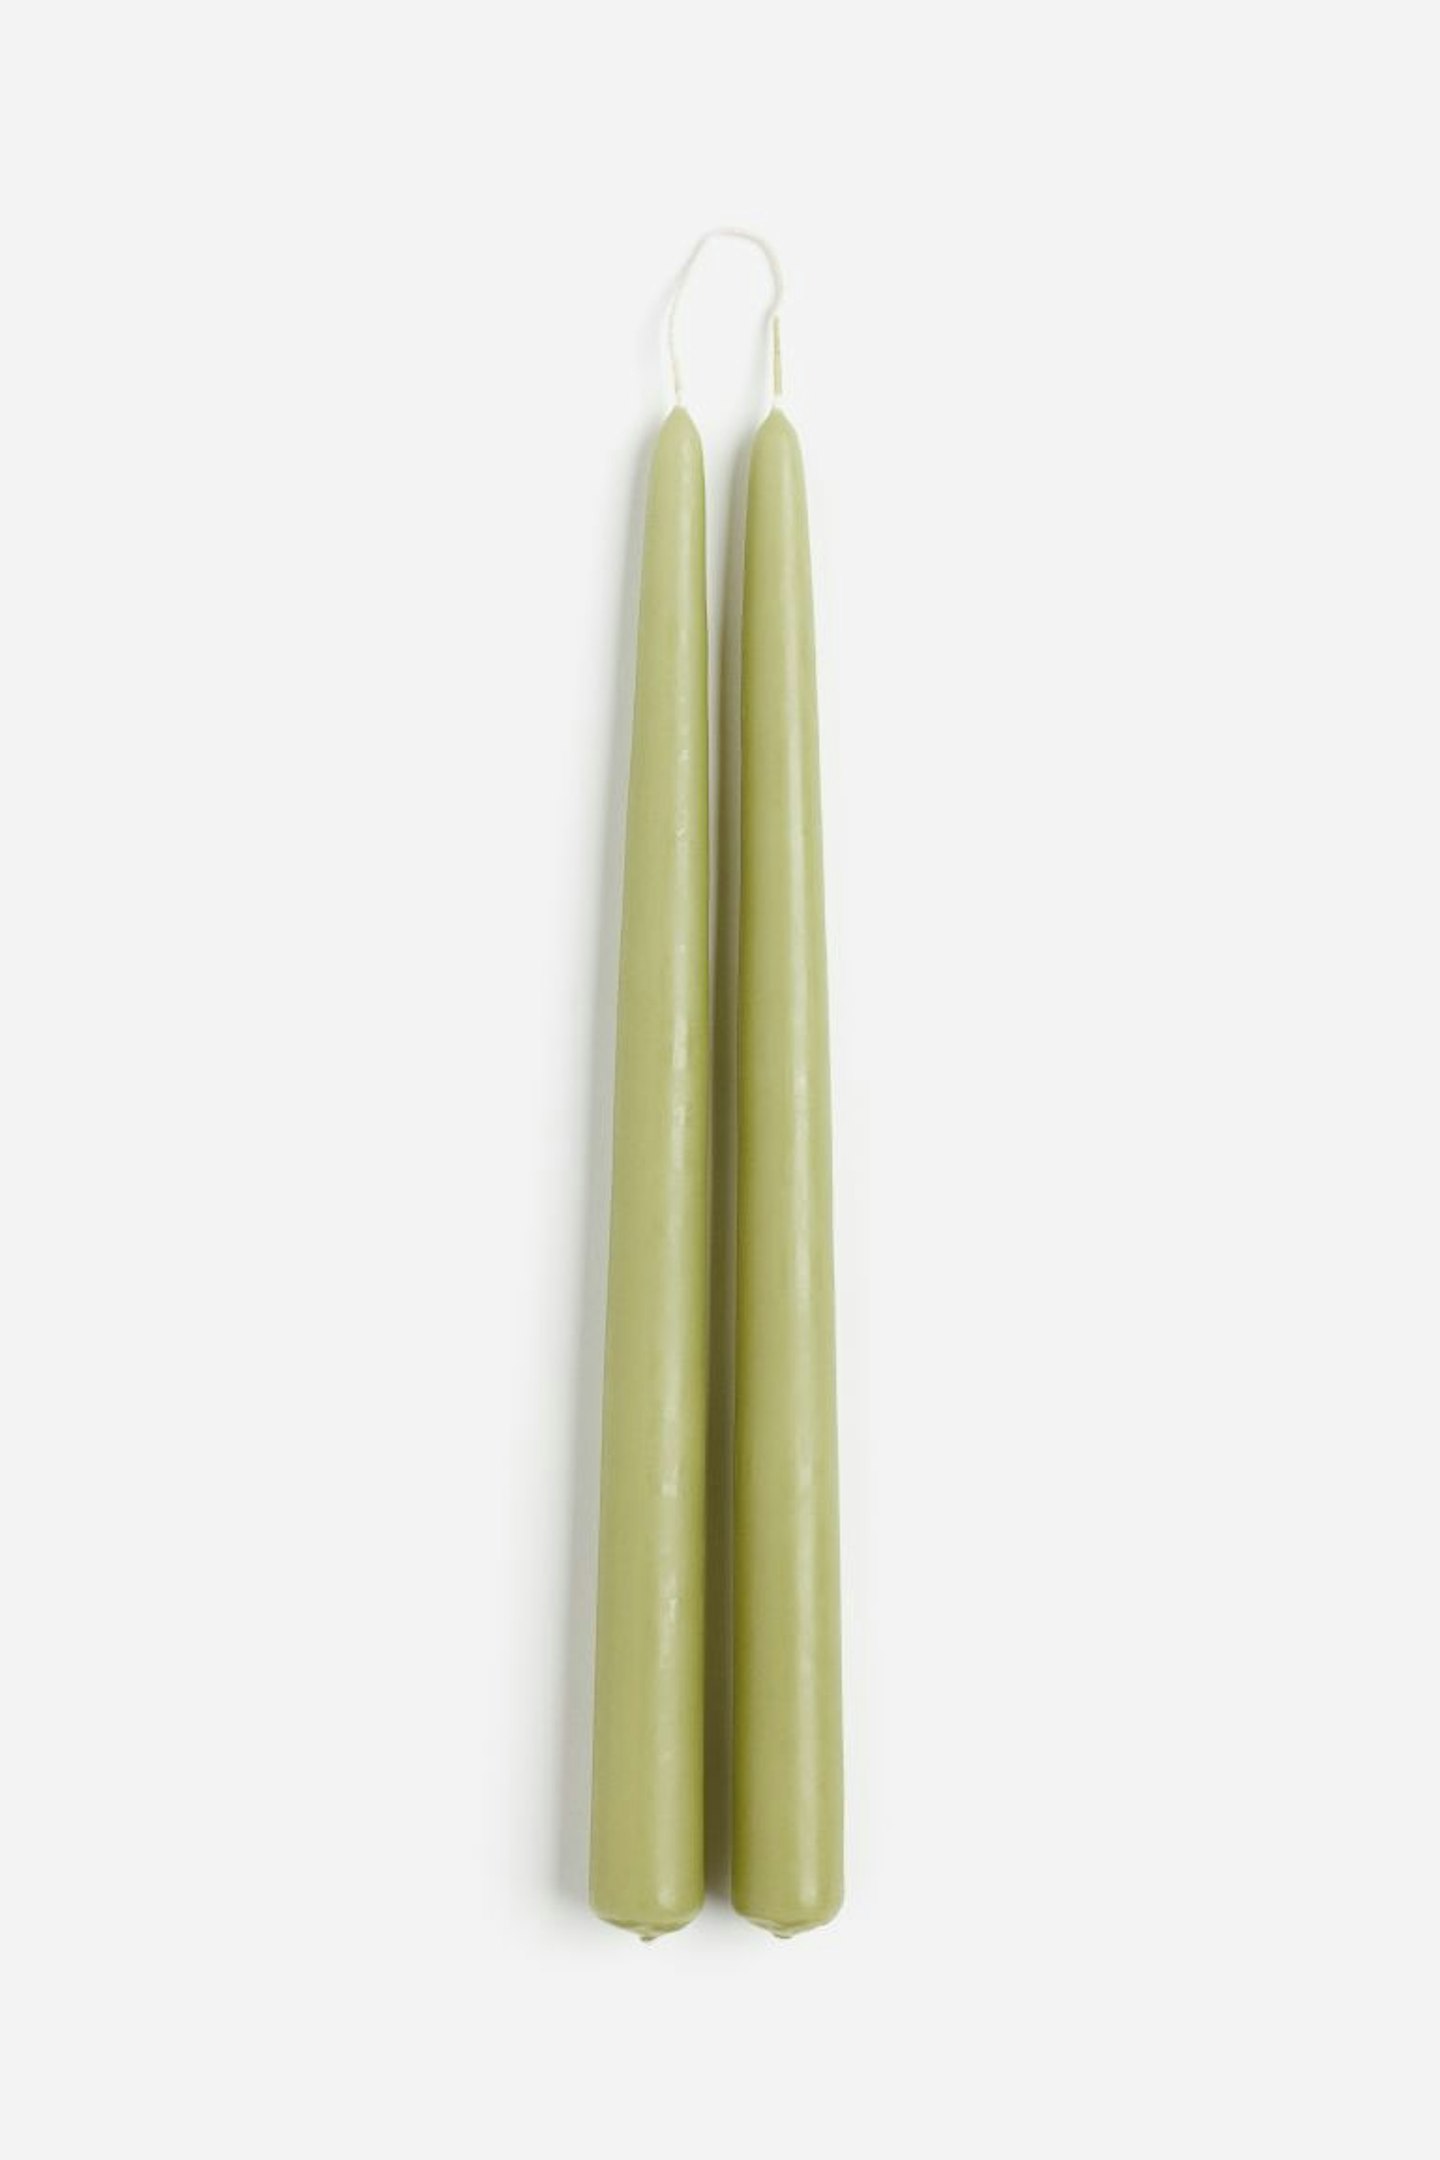 H&M, 2-Pack Tapered Candles